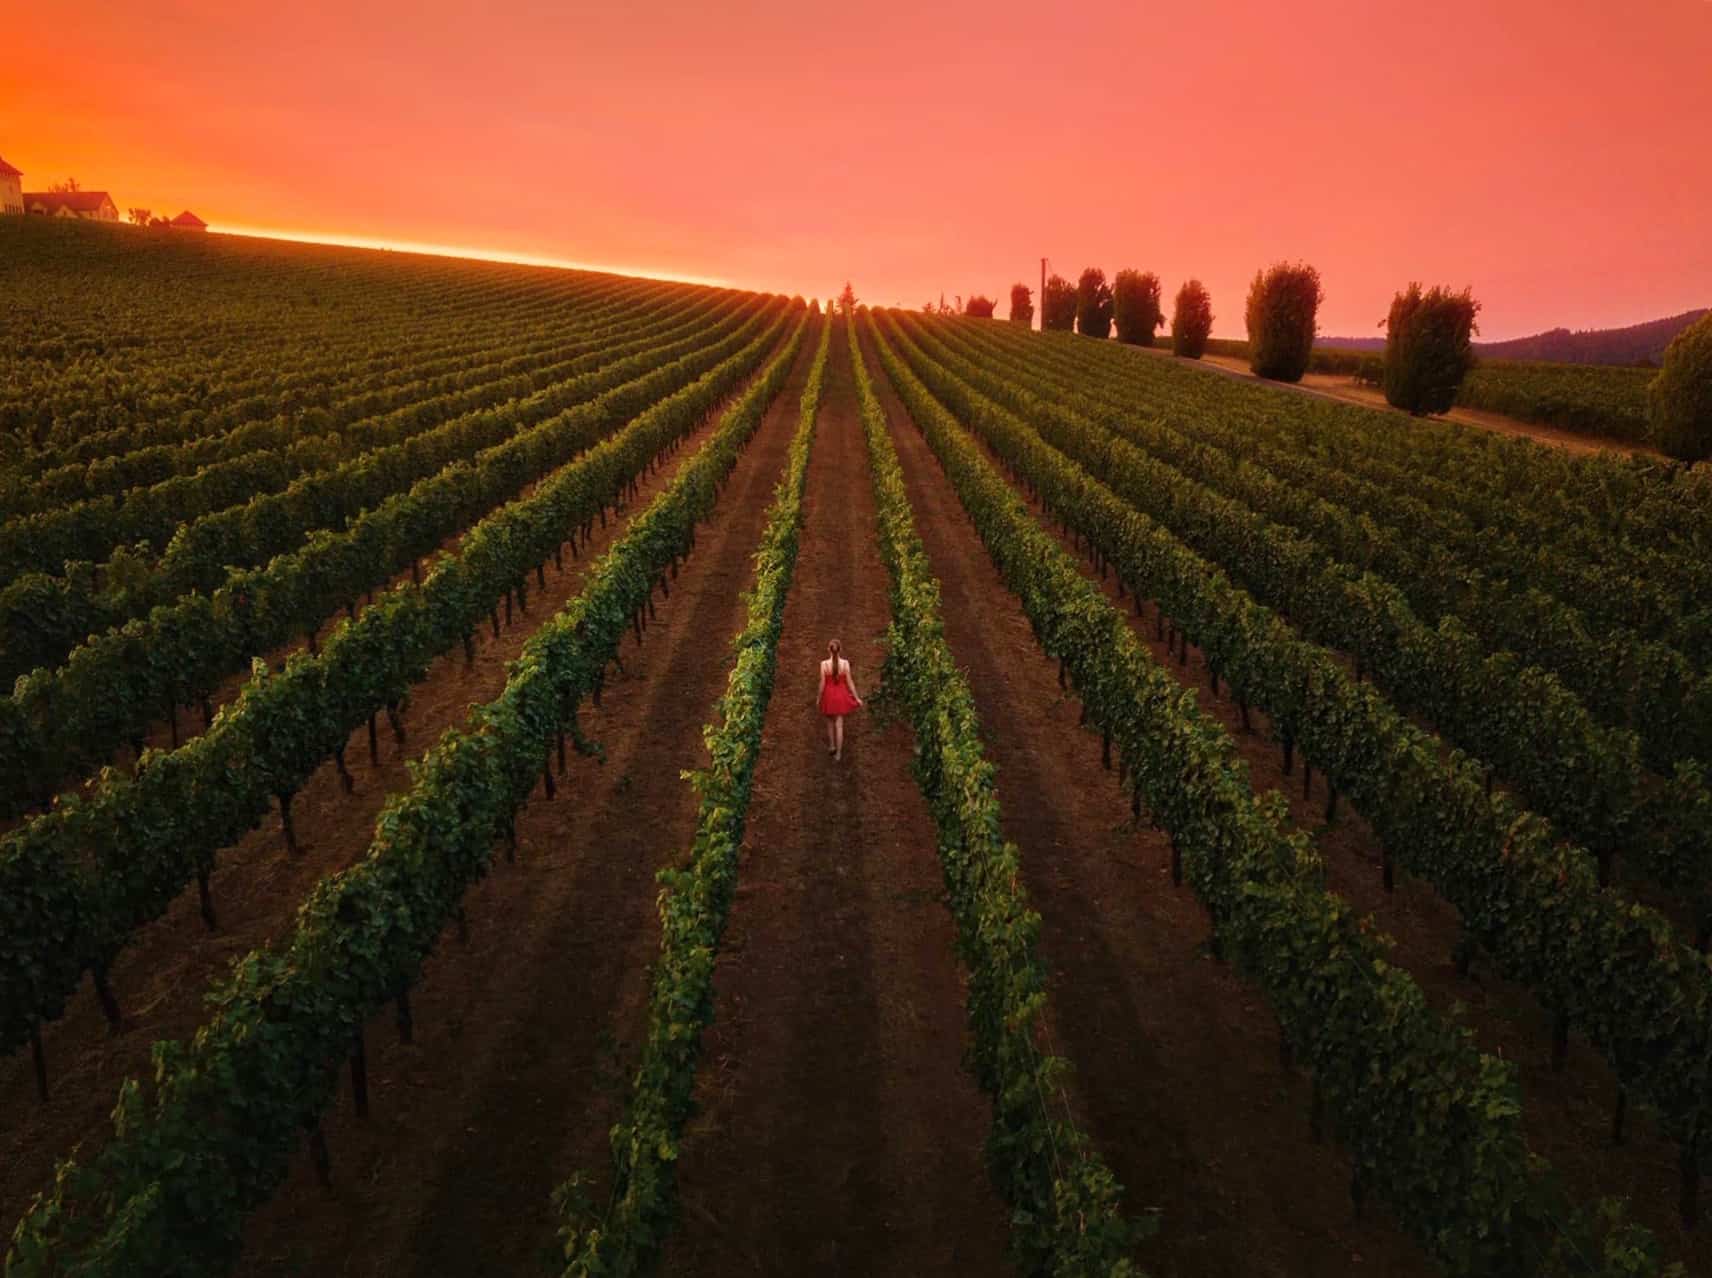 Aerial view of a woman walking through a vineyard in the Willamette Valley during a pink sunset.